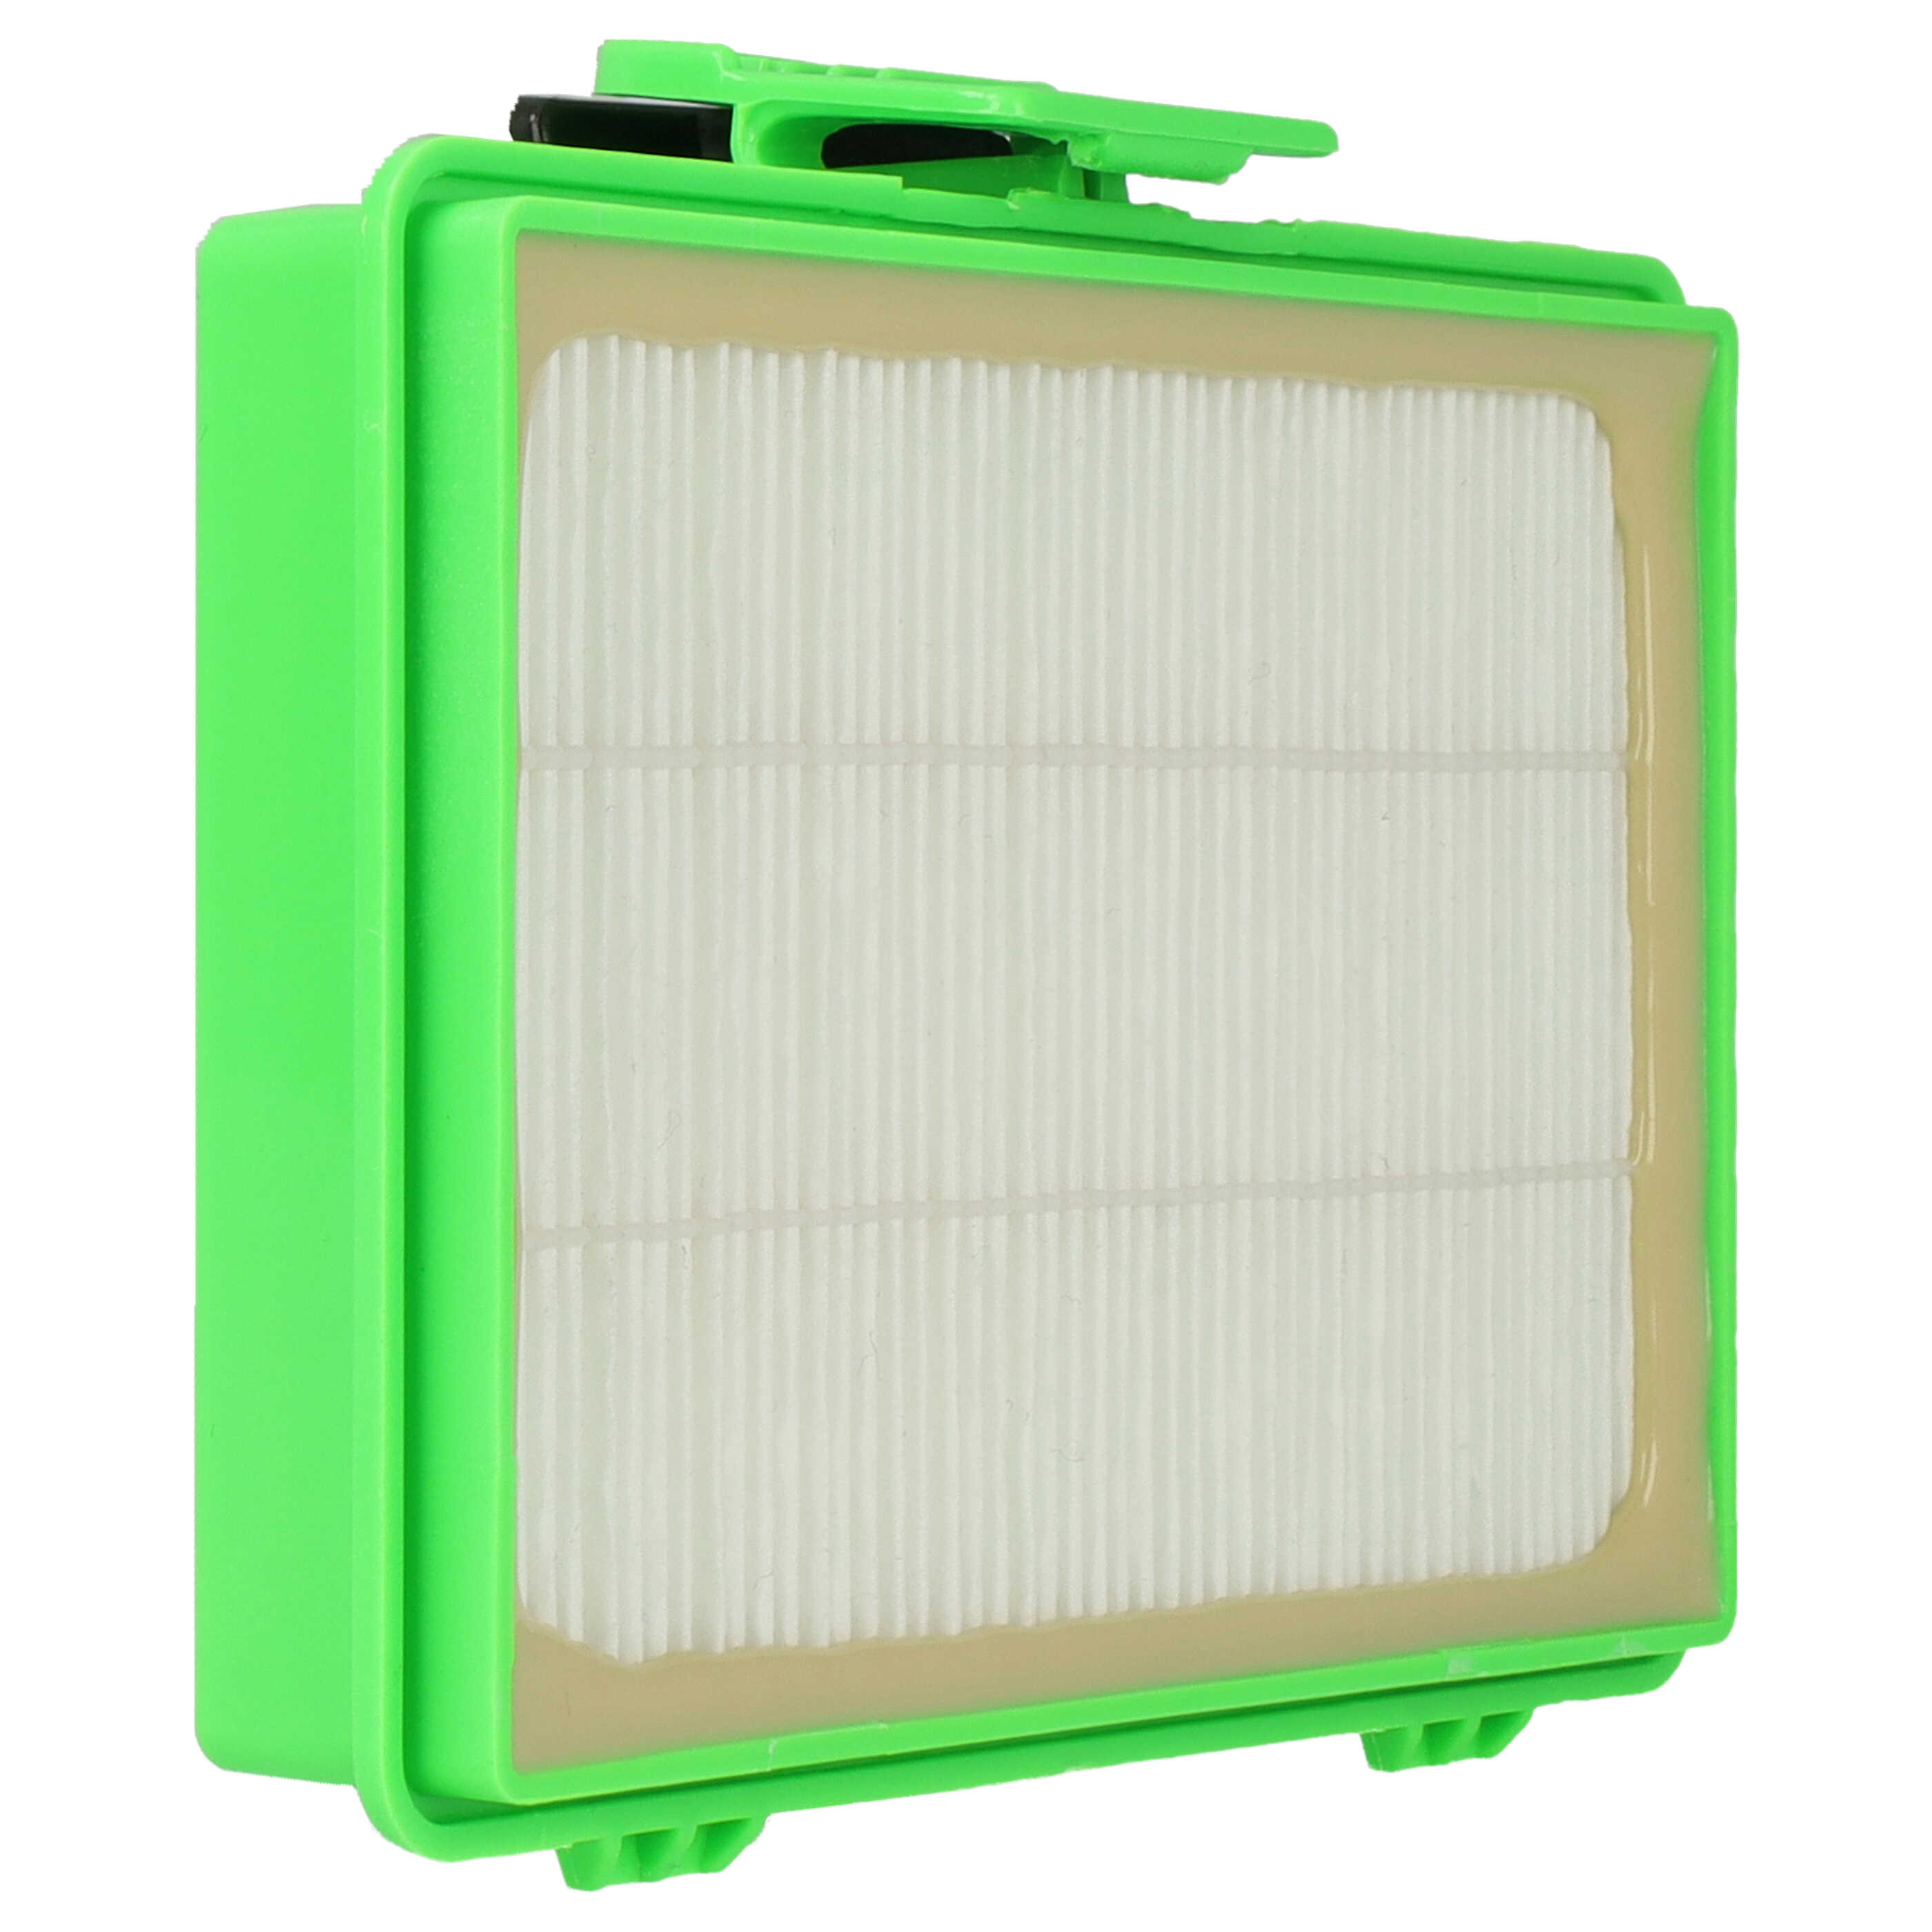 1x HEPA filter replaces Rowenta RS-RT9977 for RowentaVacuum Cleaner